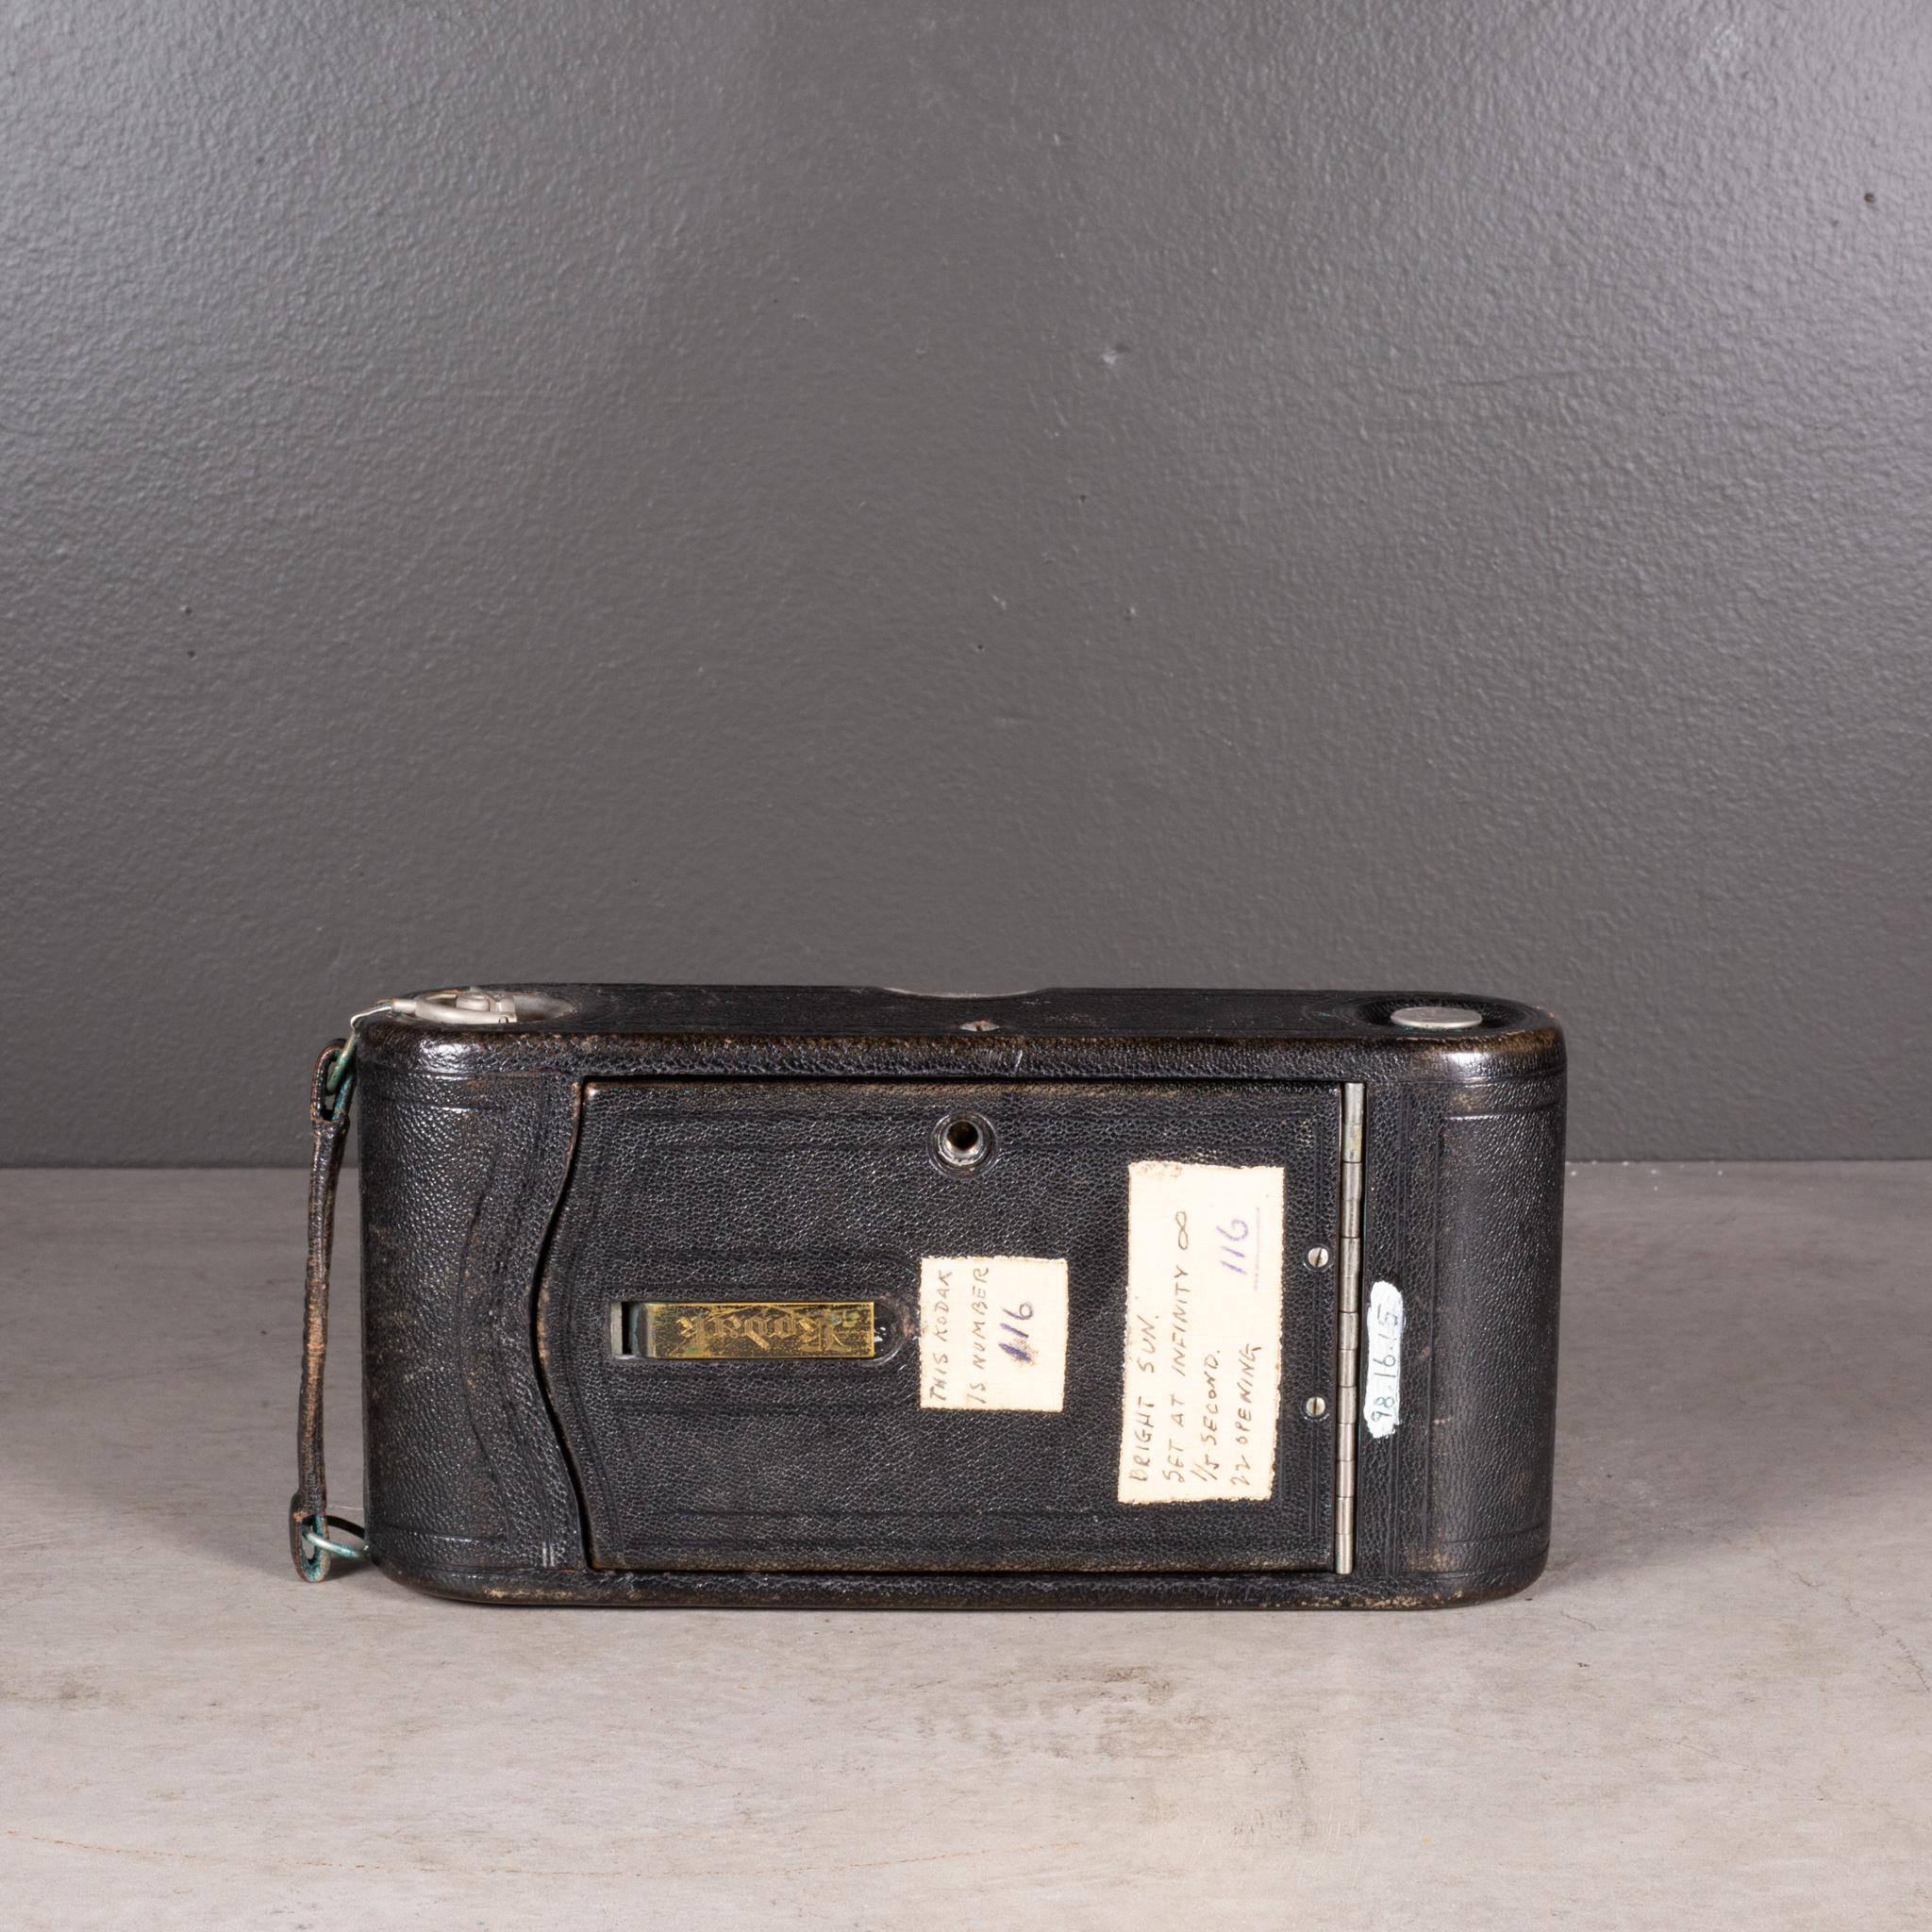 20th Century Large Kodak No. 2 Folding Camera with Leather Case c.1903 (FREE SHIPPING) For Sale